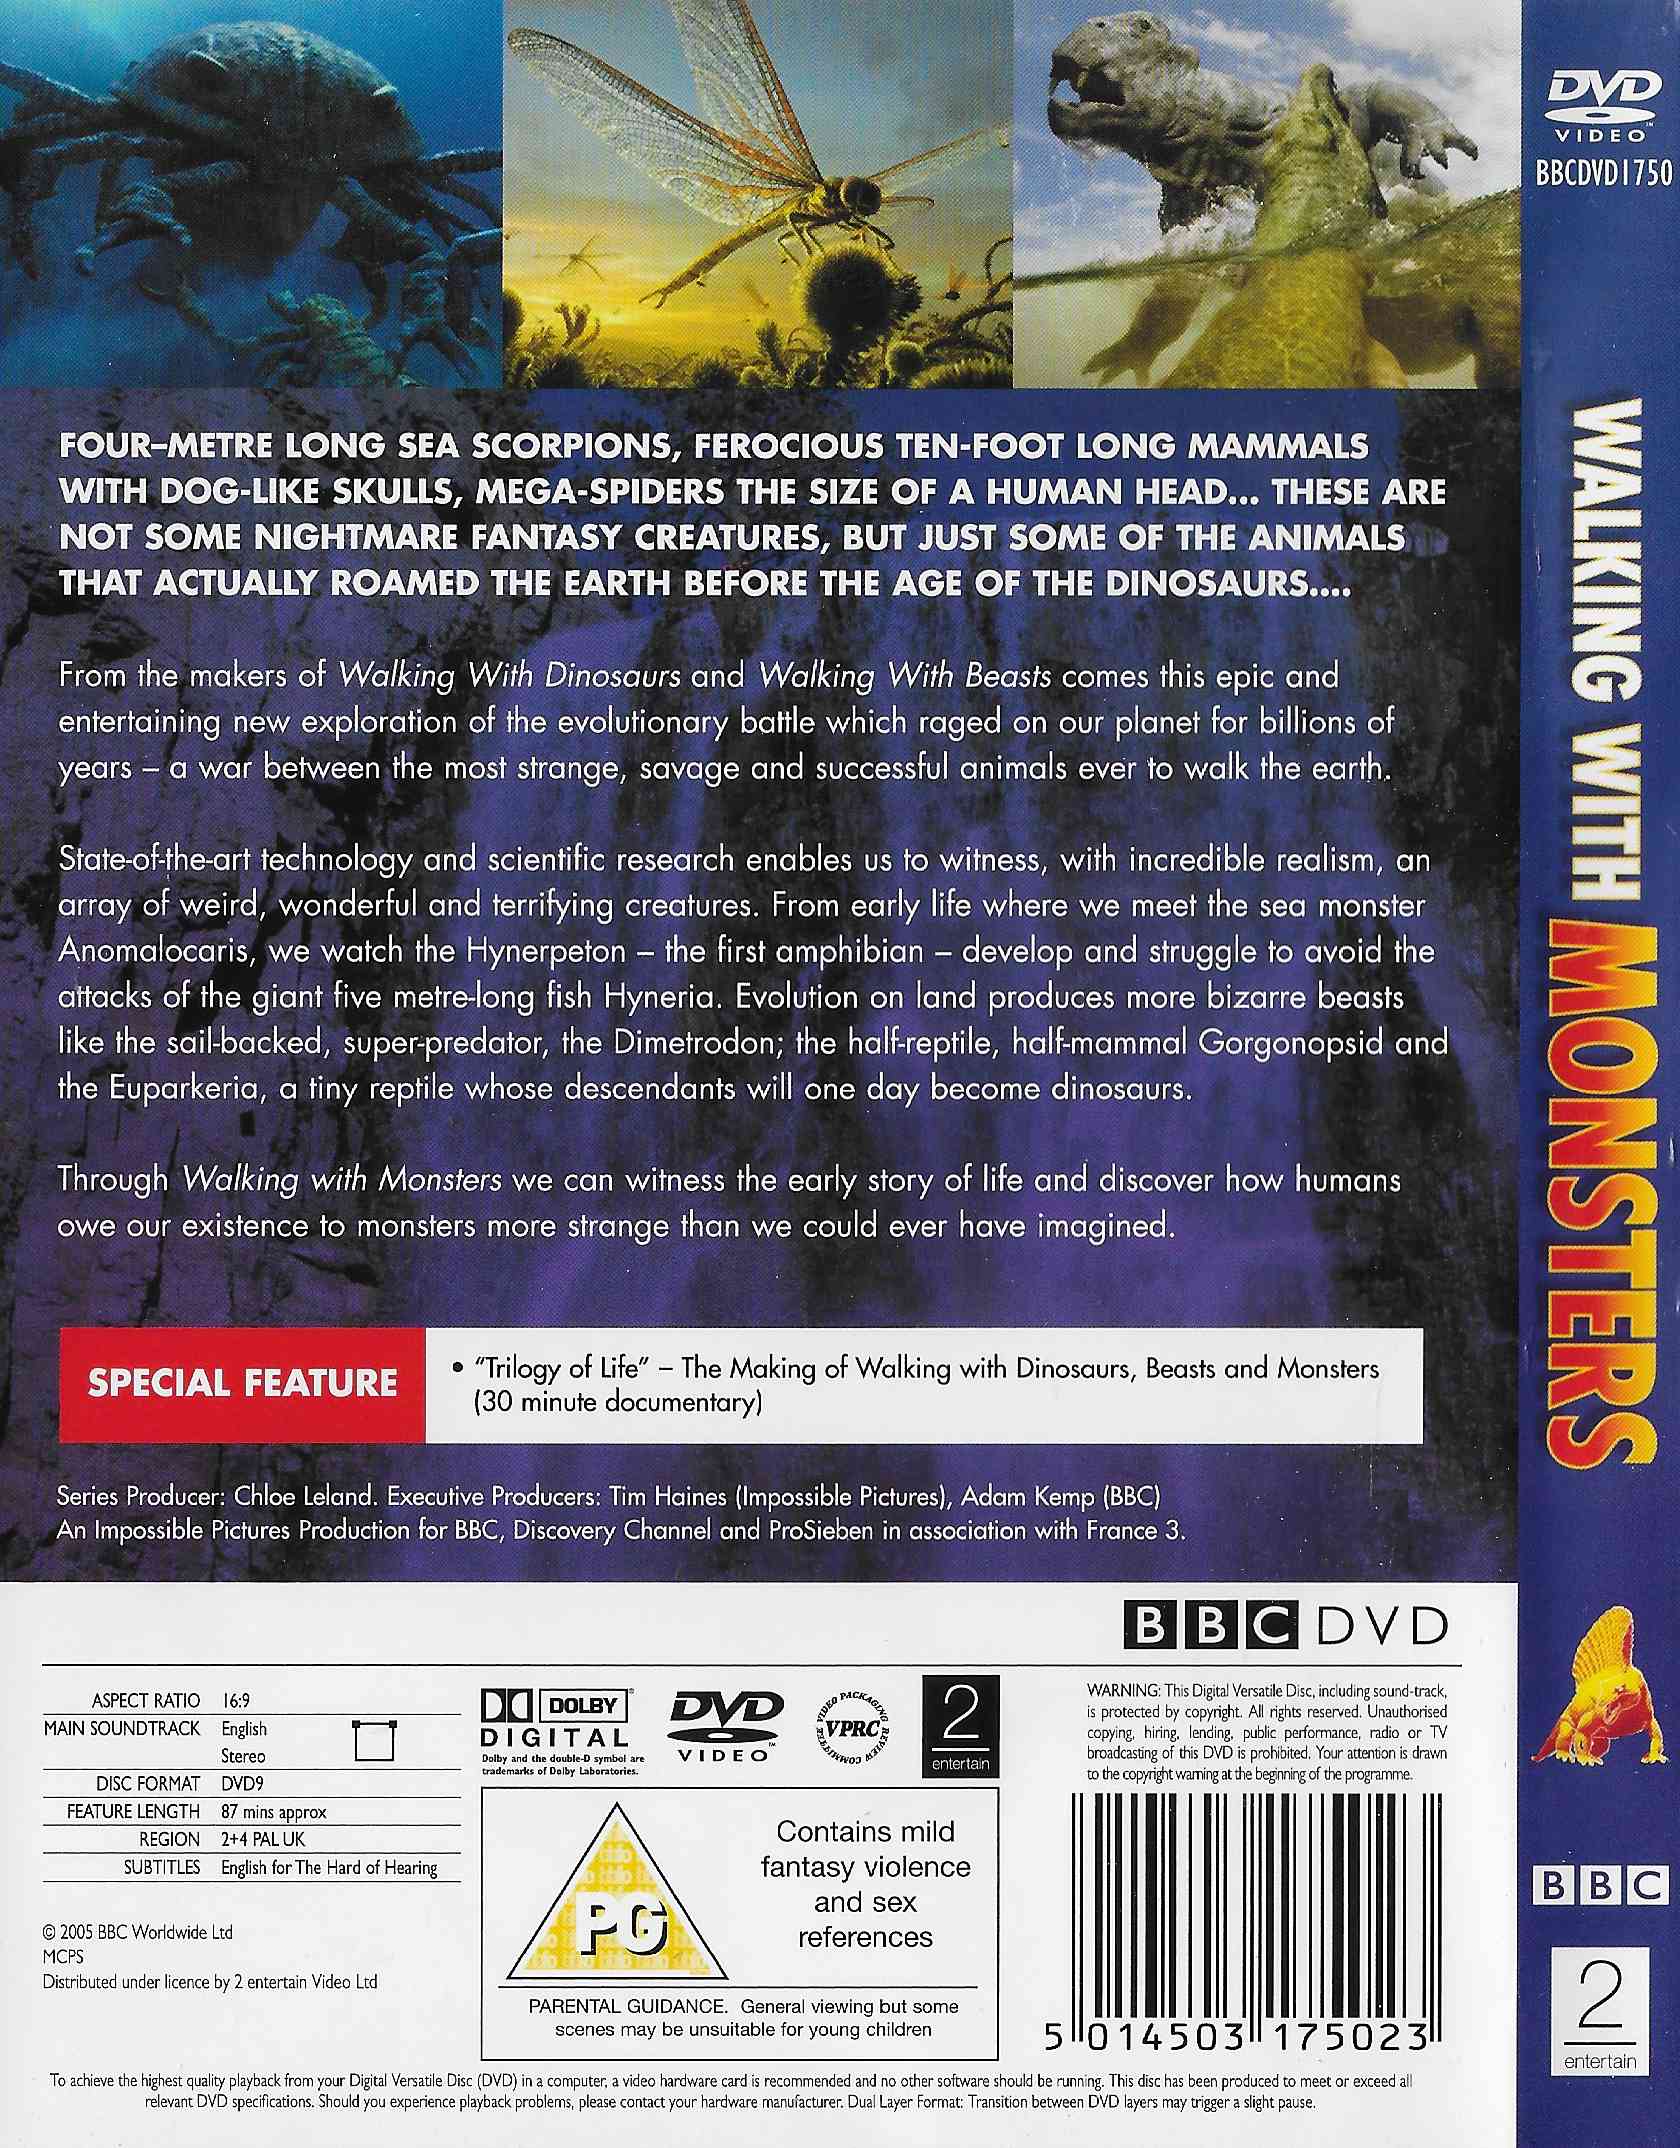 Picture of BBCDVD 1750 Walking with monsters by artist Unknown from the BBC records and Tapes library